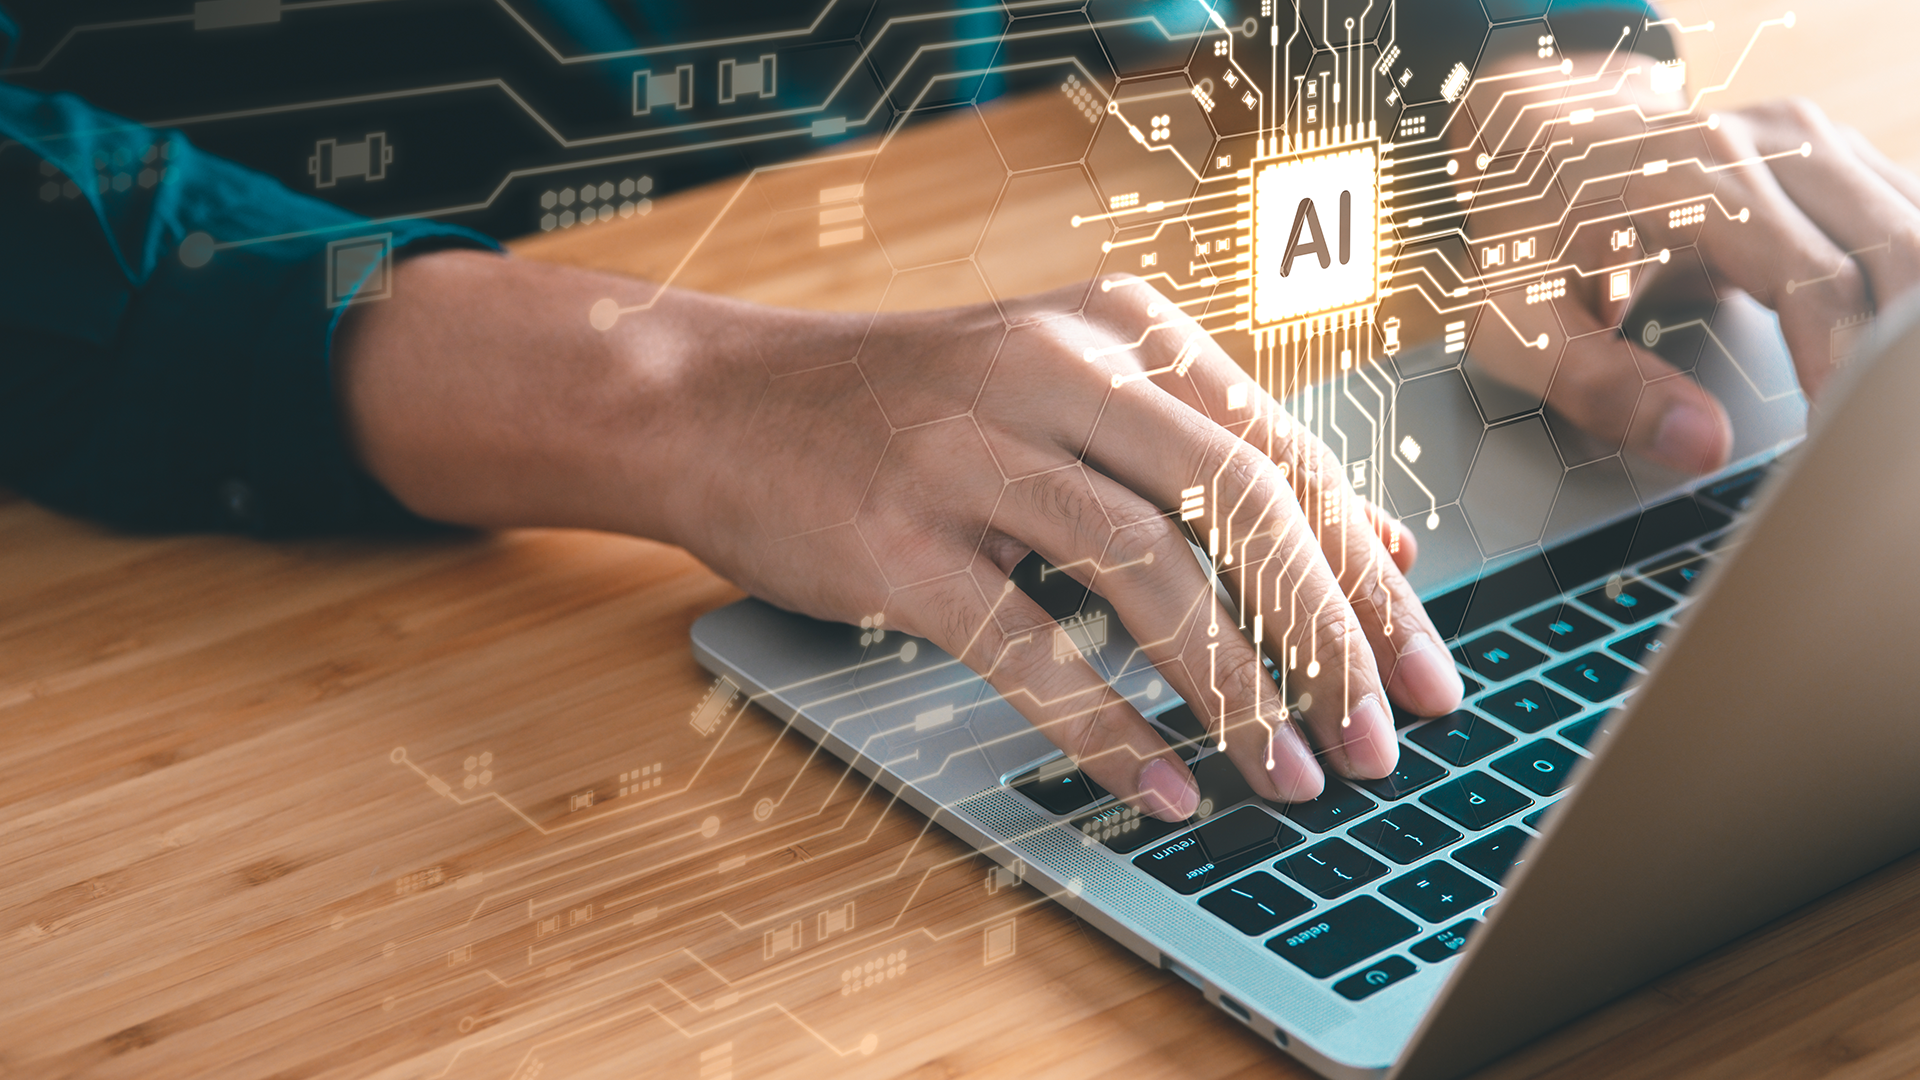 Has your website unlocked the power of AI?